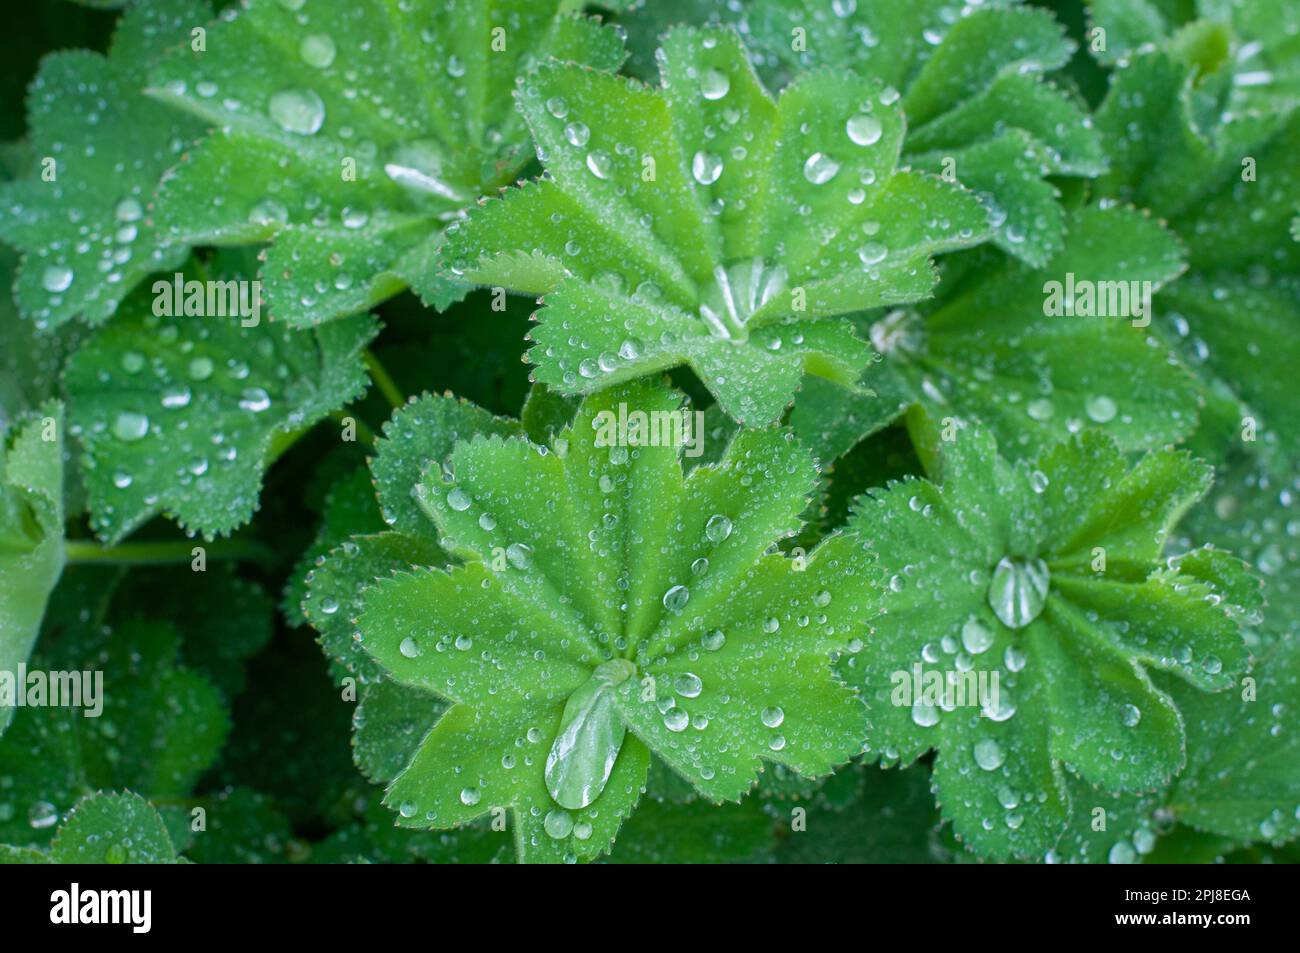 Lady's mantle (Alchemilla vulgaris) leaves after rain. No flowers for background. Stock Photo